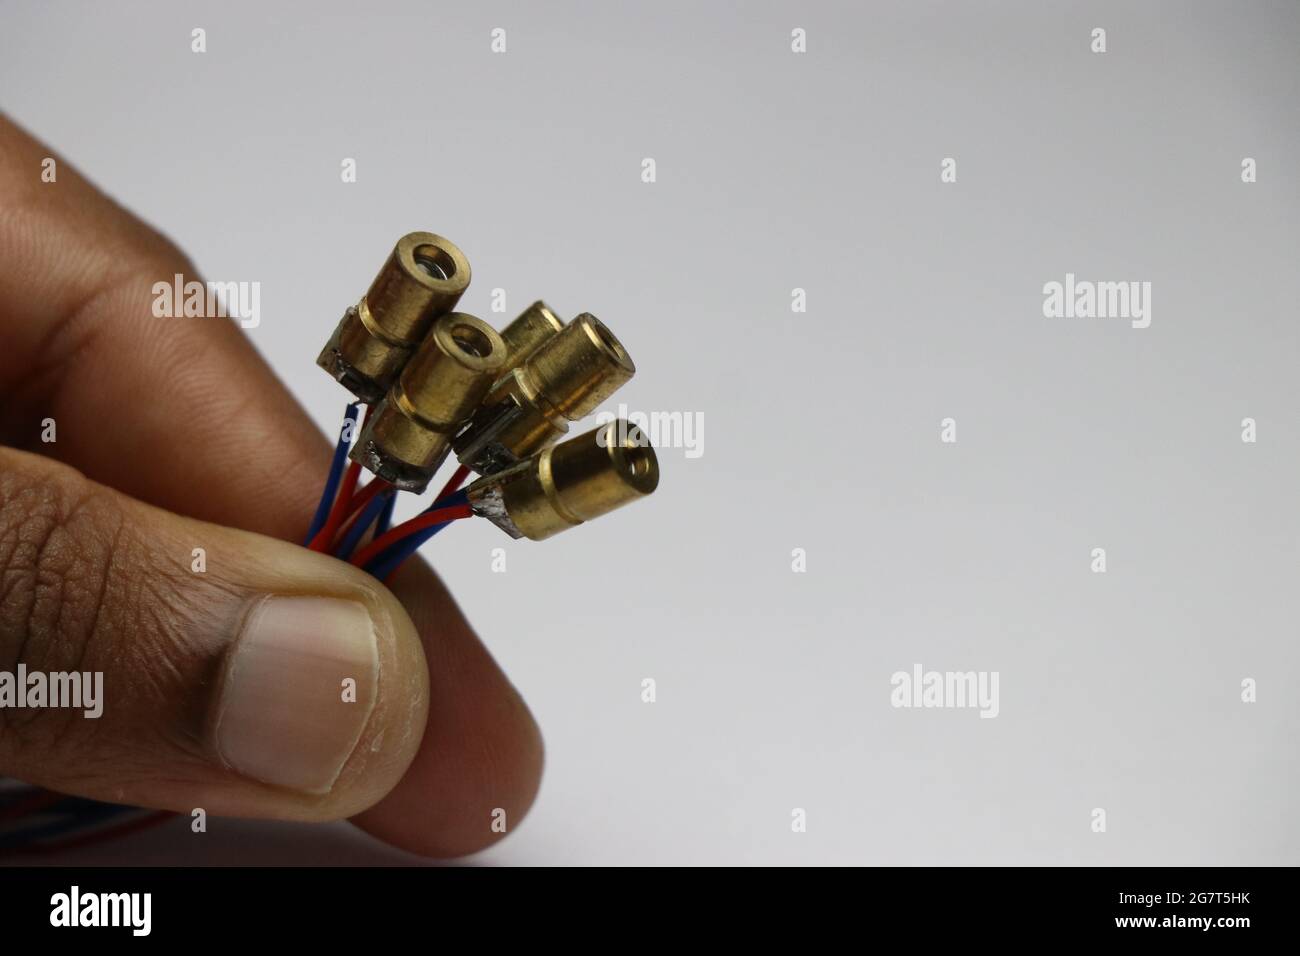 Group of copper case red dot laser diodes held in hand. Electronic components for laser light experiments Stock Photo